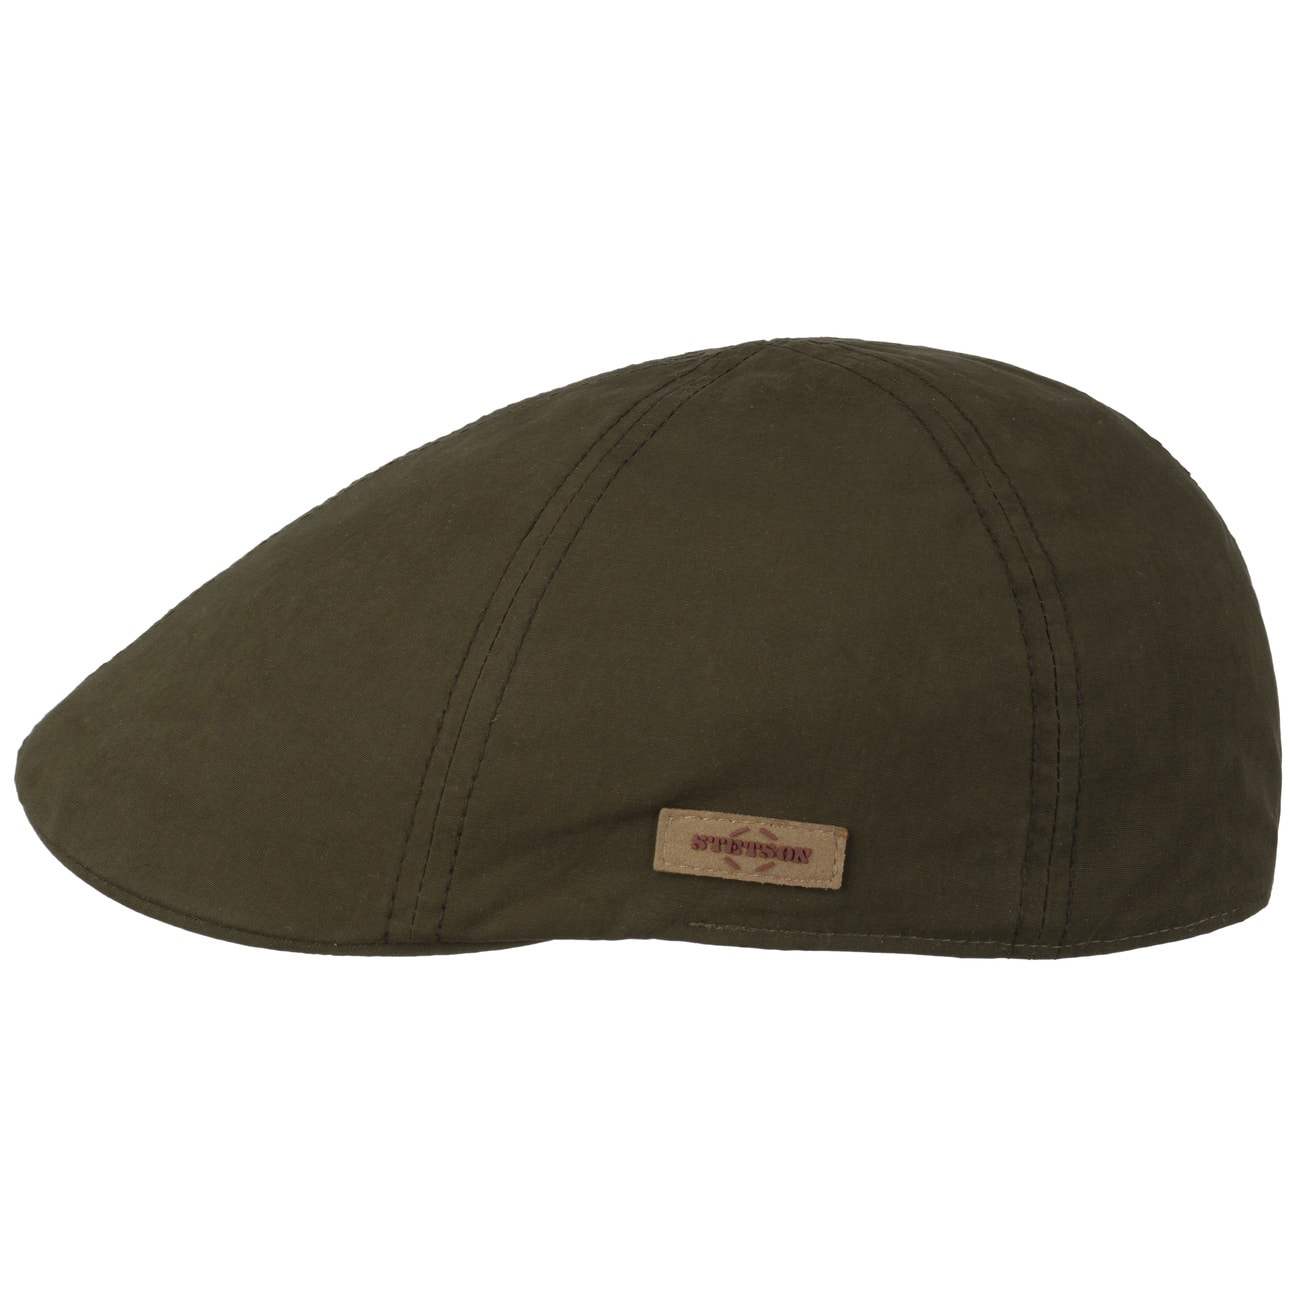 Stetson---Texas-Waxed-Cotton-WR-Flat-Cap---Olive